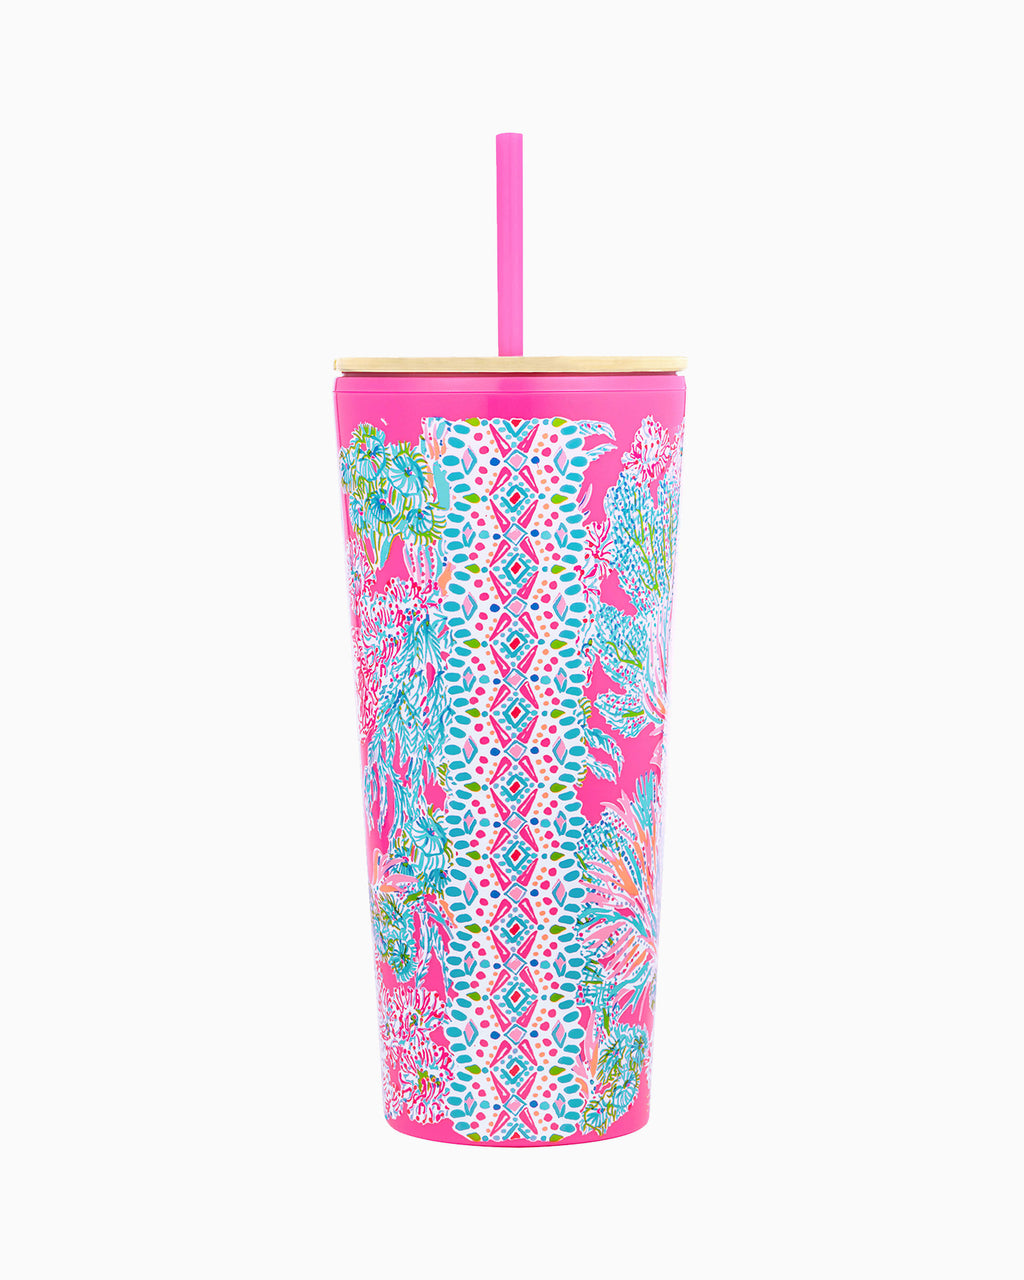 Lilly Pulitzer Acrylic Tumbler with Straw, Seaing Things - Monogram Market